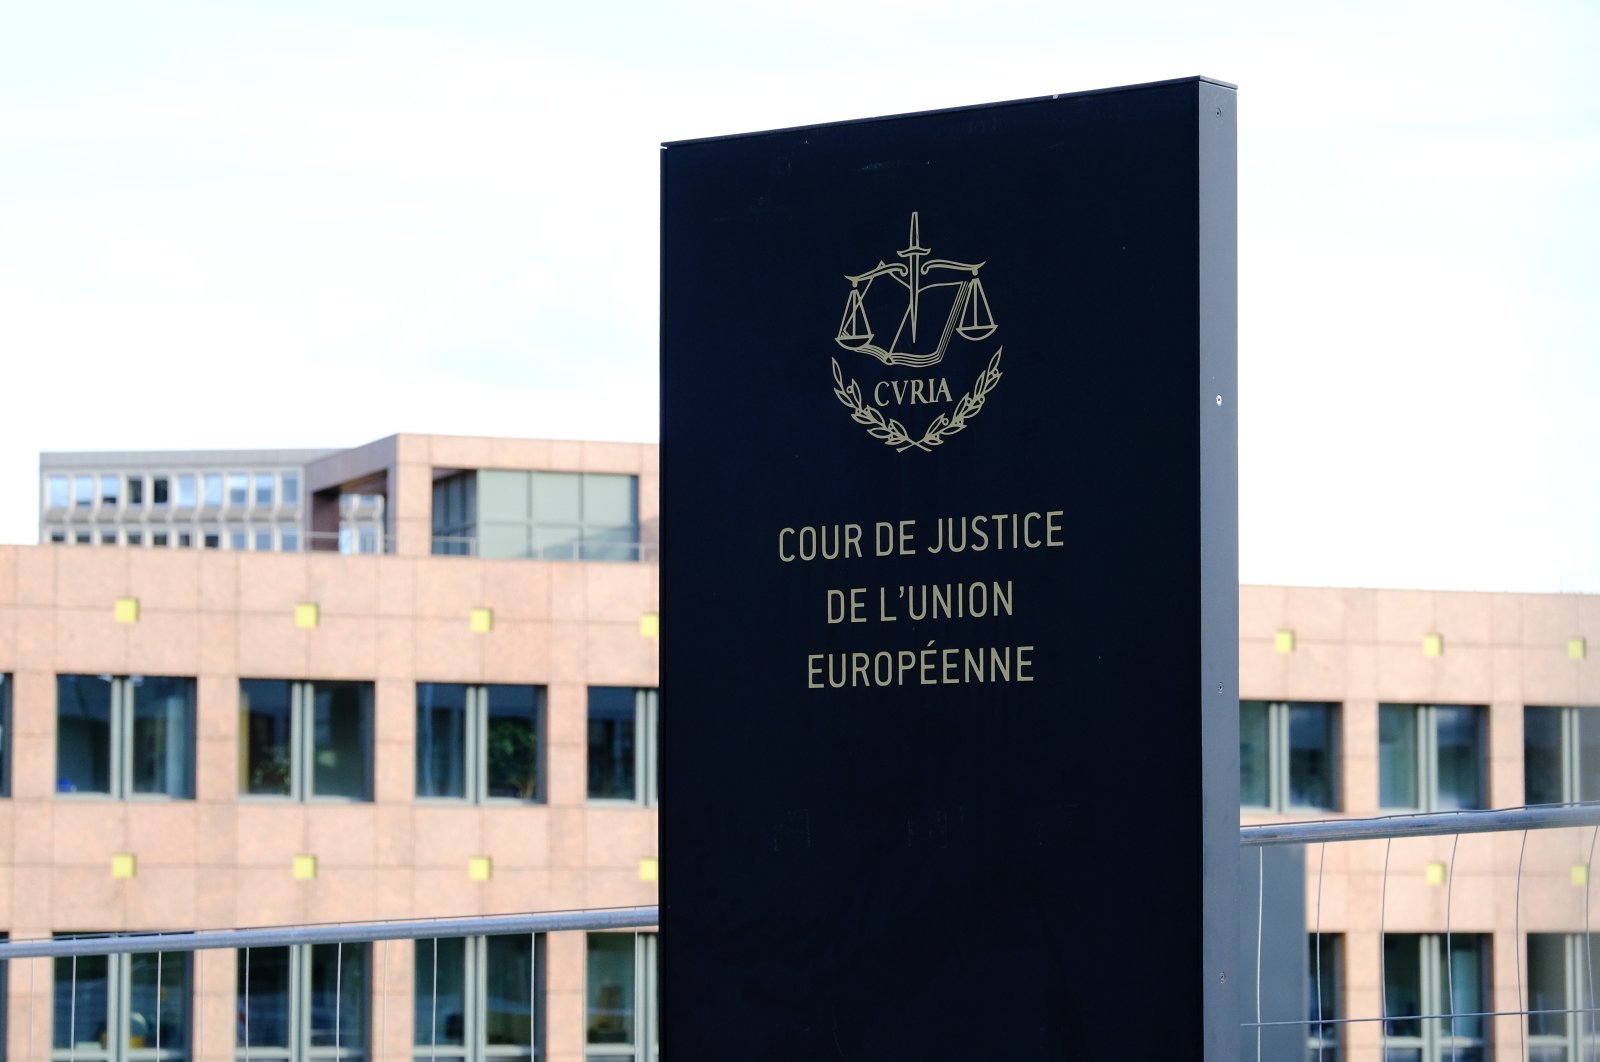 An exterior view of the European Court of Justice in Luxembourg on April 7, 2021. (Shutterstock Photo)